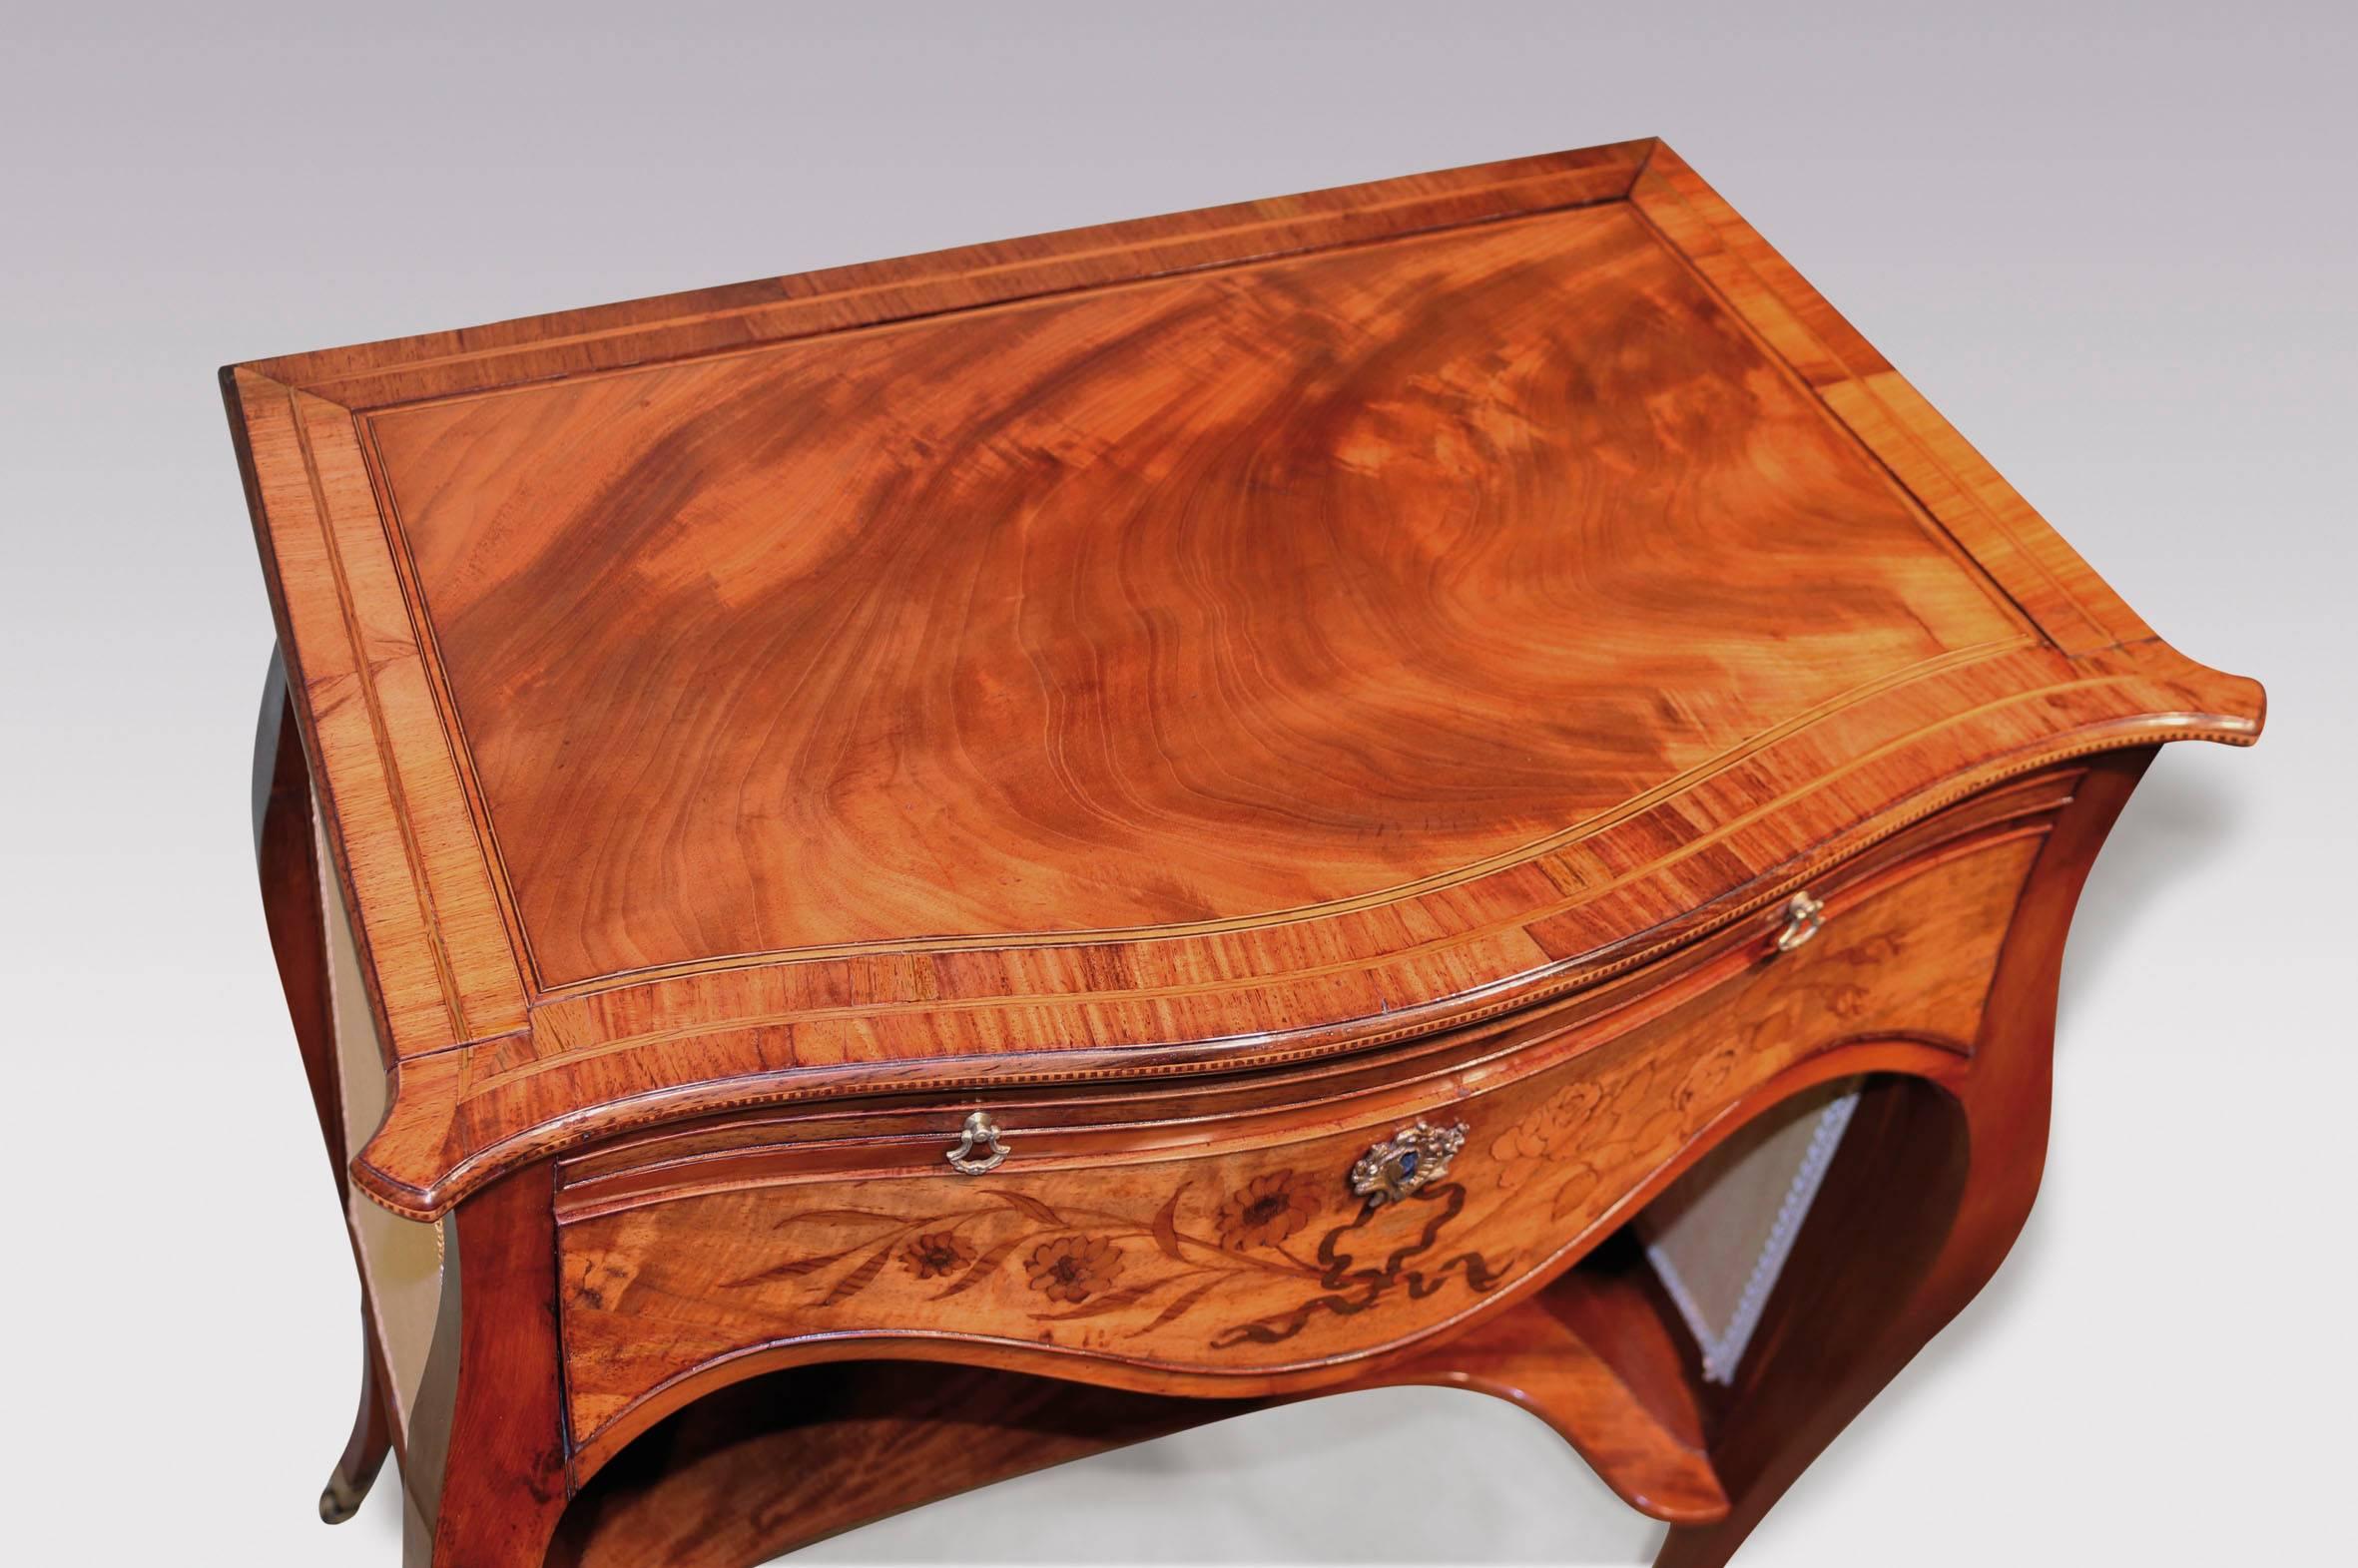 A late 18th century ‘French Hepplewhite’ figured mahogany ladies writing table of serpentine form, having boxwood and ebony strung tulipwood crossbanded top with chequered inlaid edge. The table with three lift up slides centered with marquetry